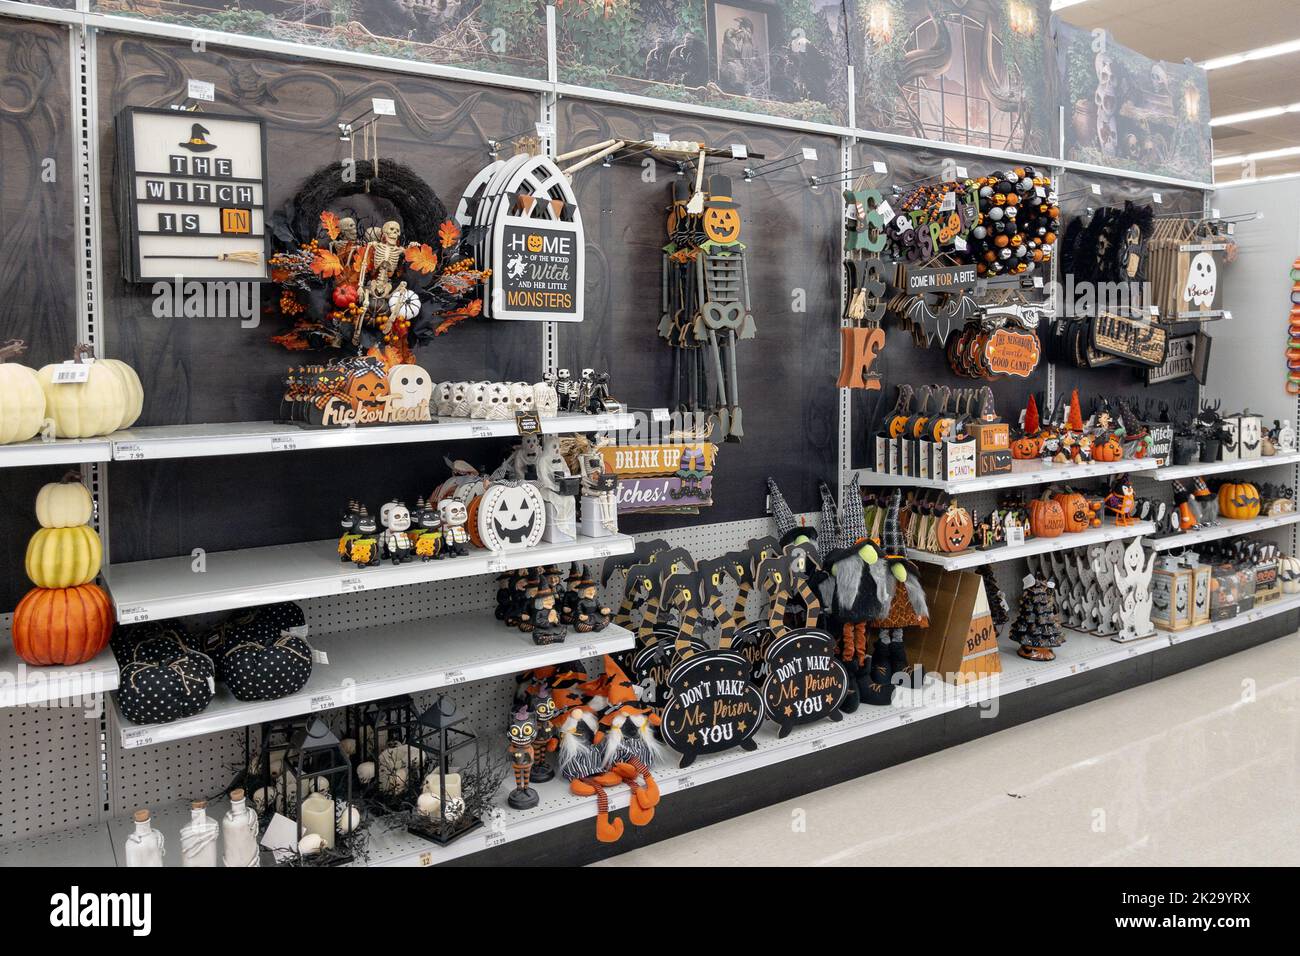 Halloween decorations for sale on the shelves Stock Photo